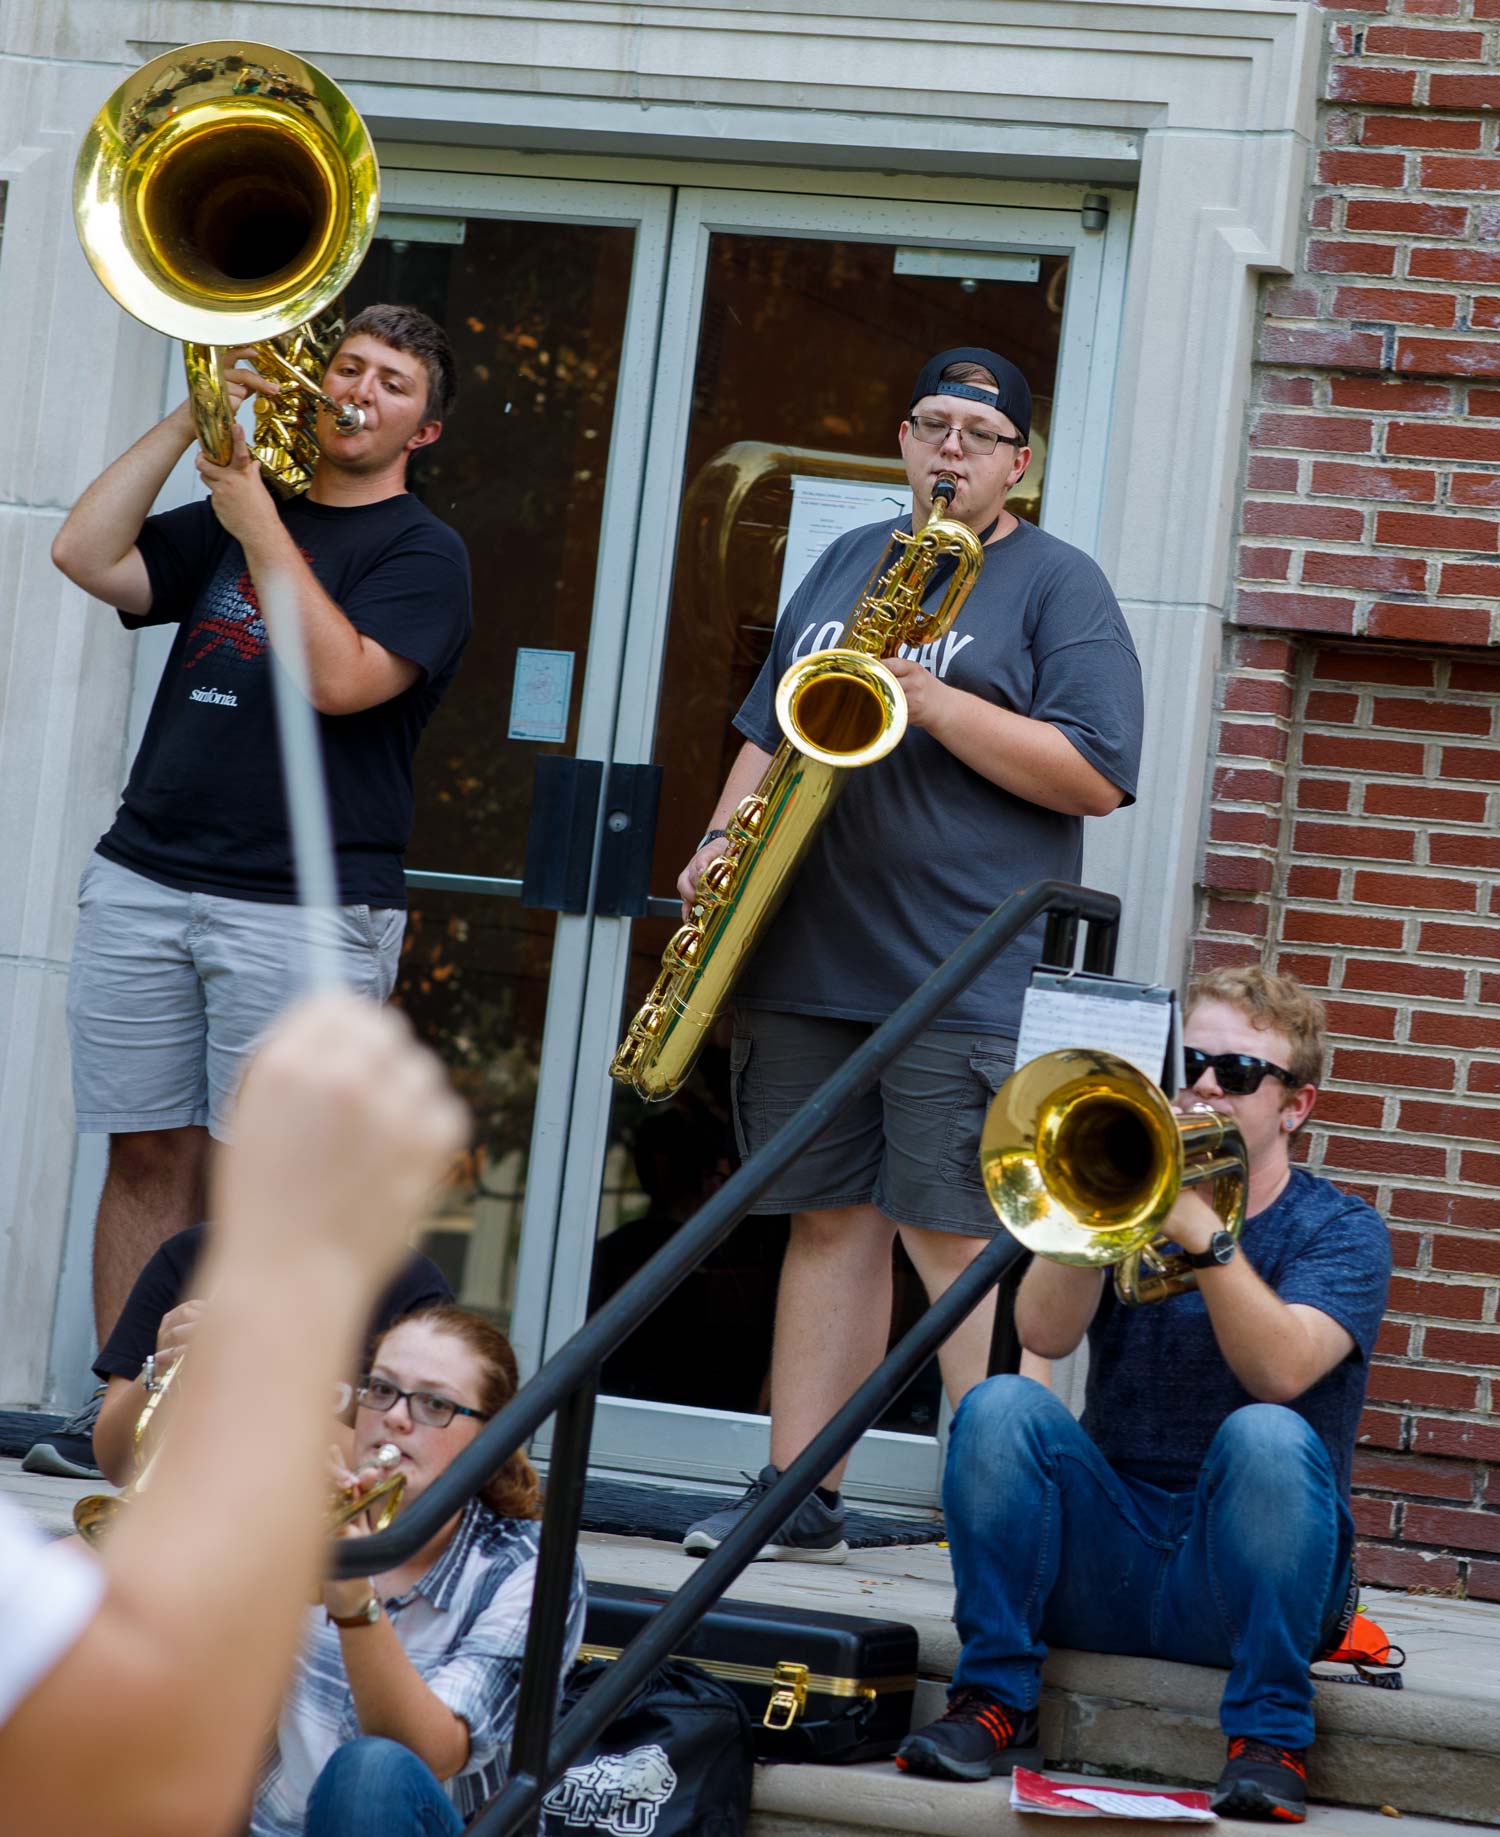 Music students practice outside Presser Hall on the campus of Ohio Northern University.